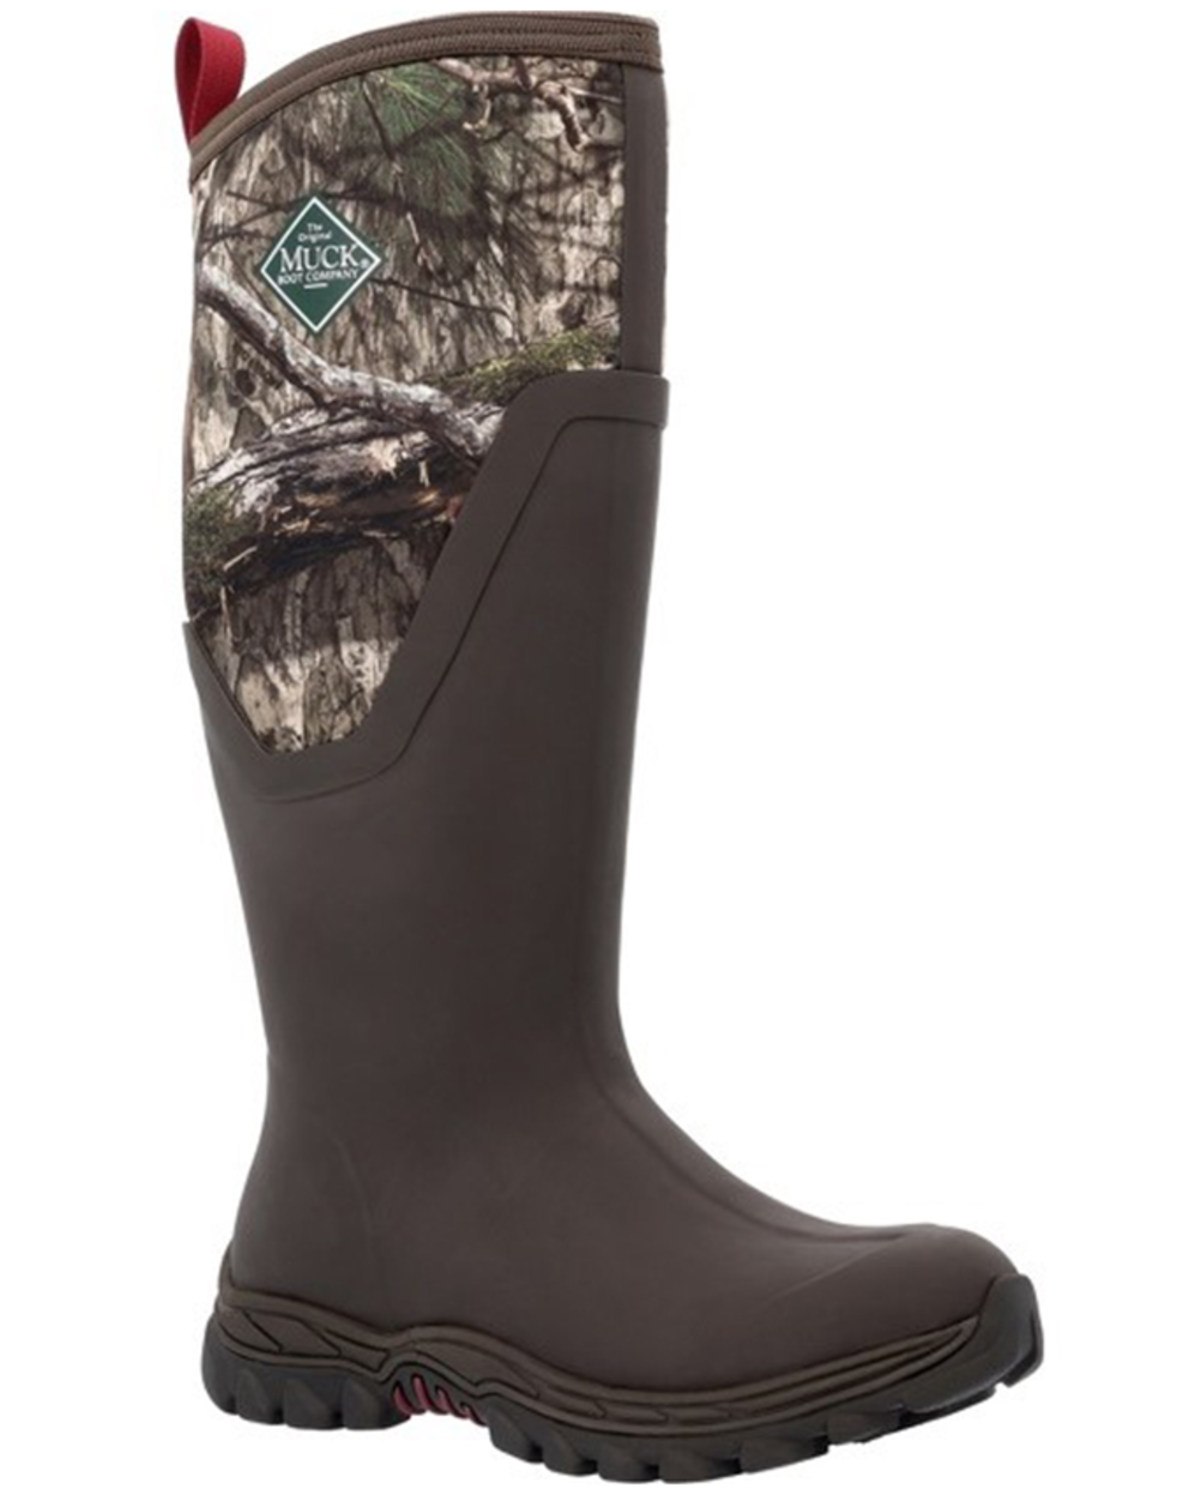 Muck Boots Women's Mossy Oak® Country DNA™ Arctic Sport II Tall Work - Round Toe